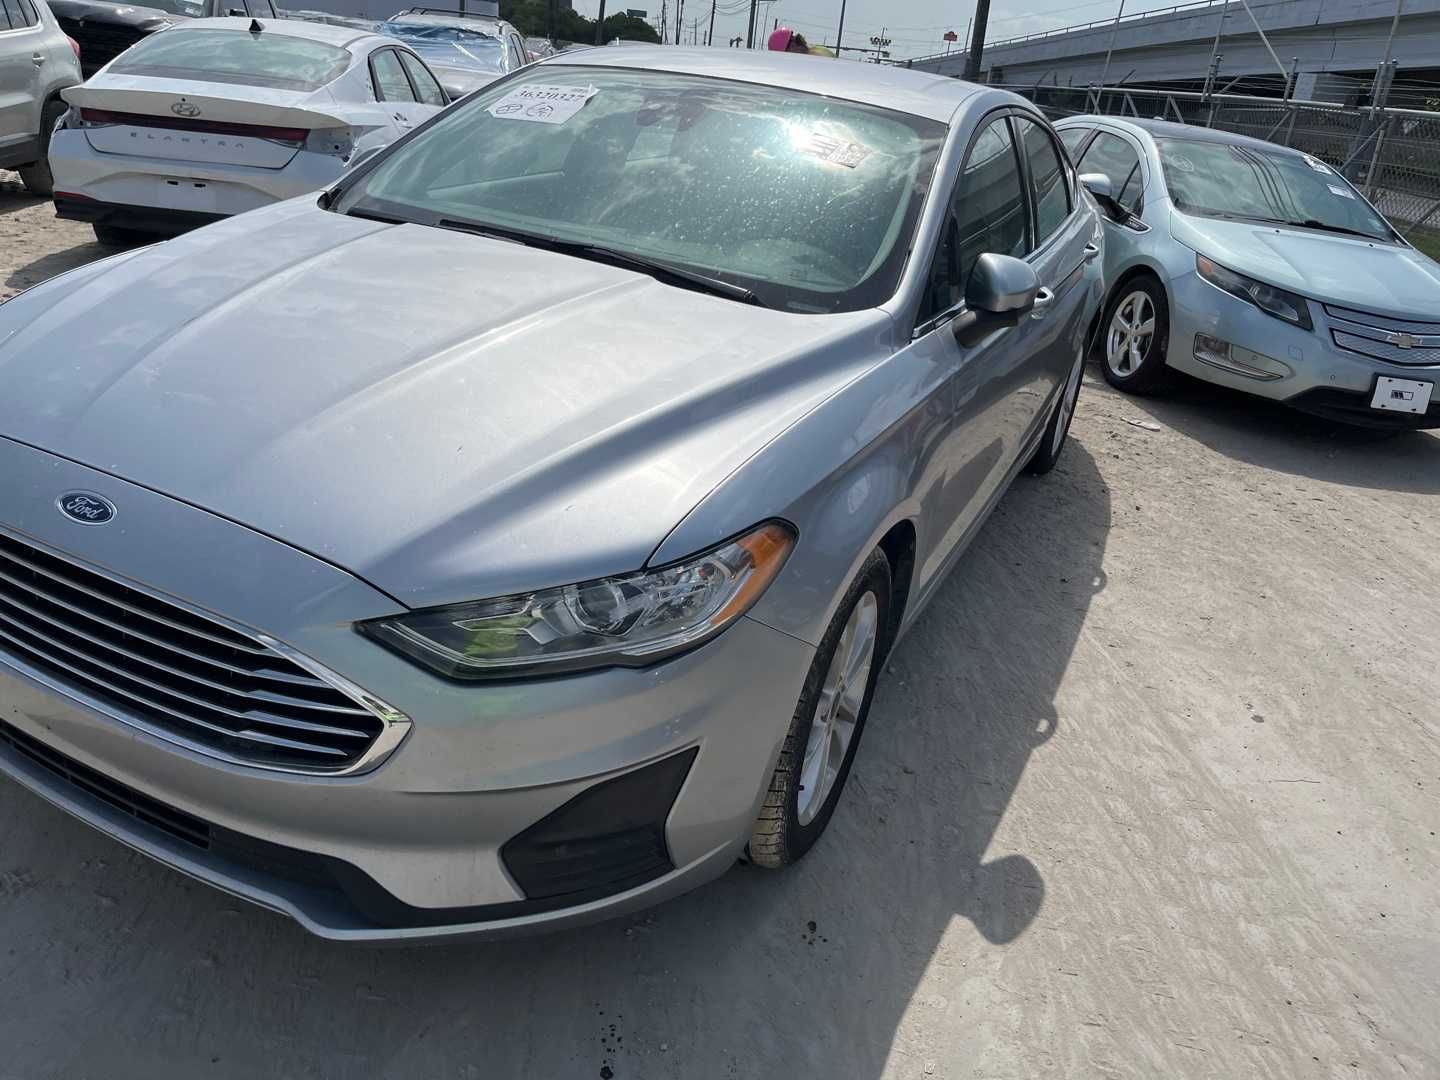 Ford Fusion/Mondeo 1,5 ecoboost, SE, automat, jak nowy.